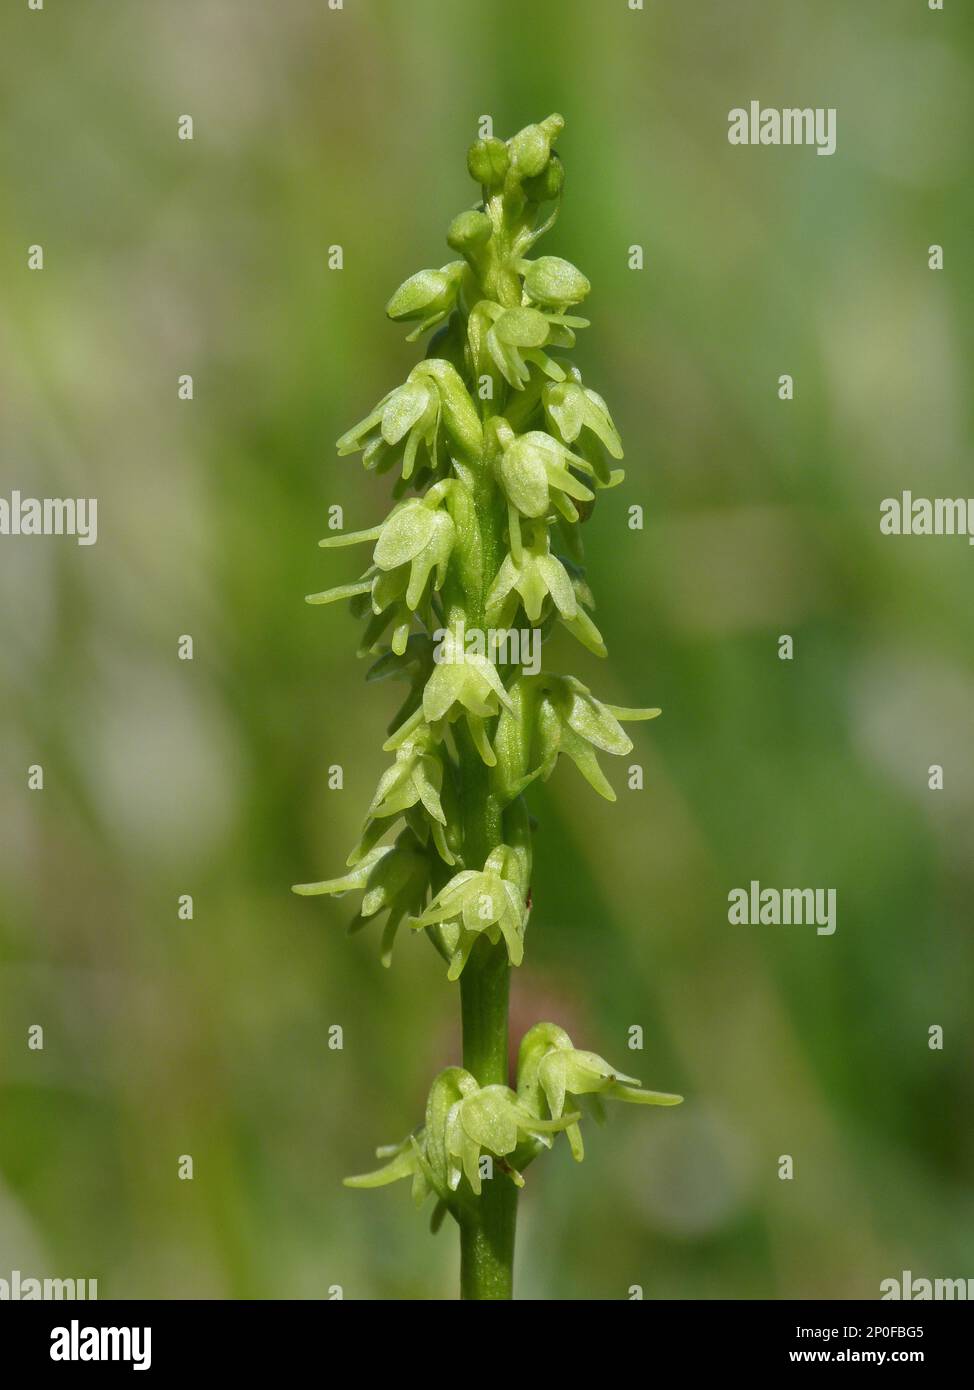 Musk orchid (Herminium monorchis) close-up of a flower spike, Gloucestershire, June 2015 Stock Photo